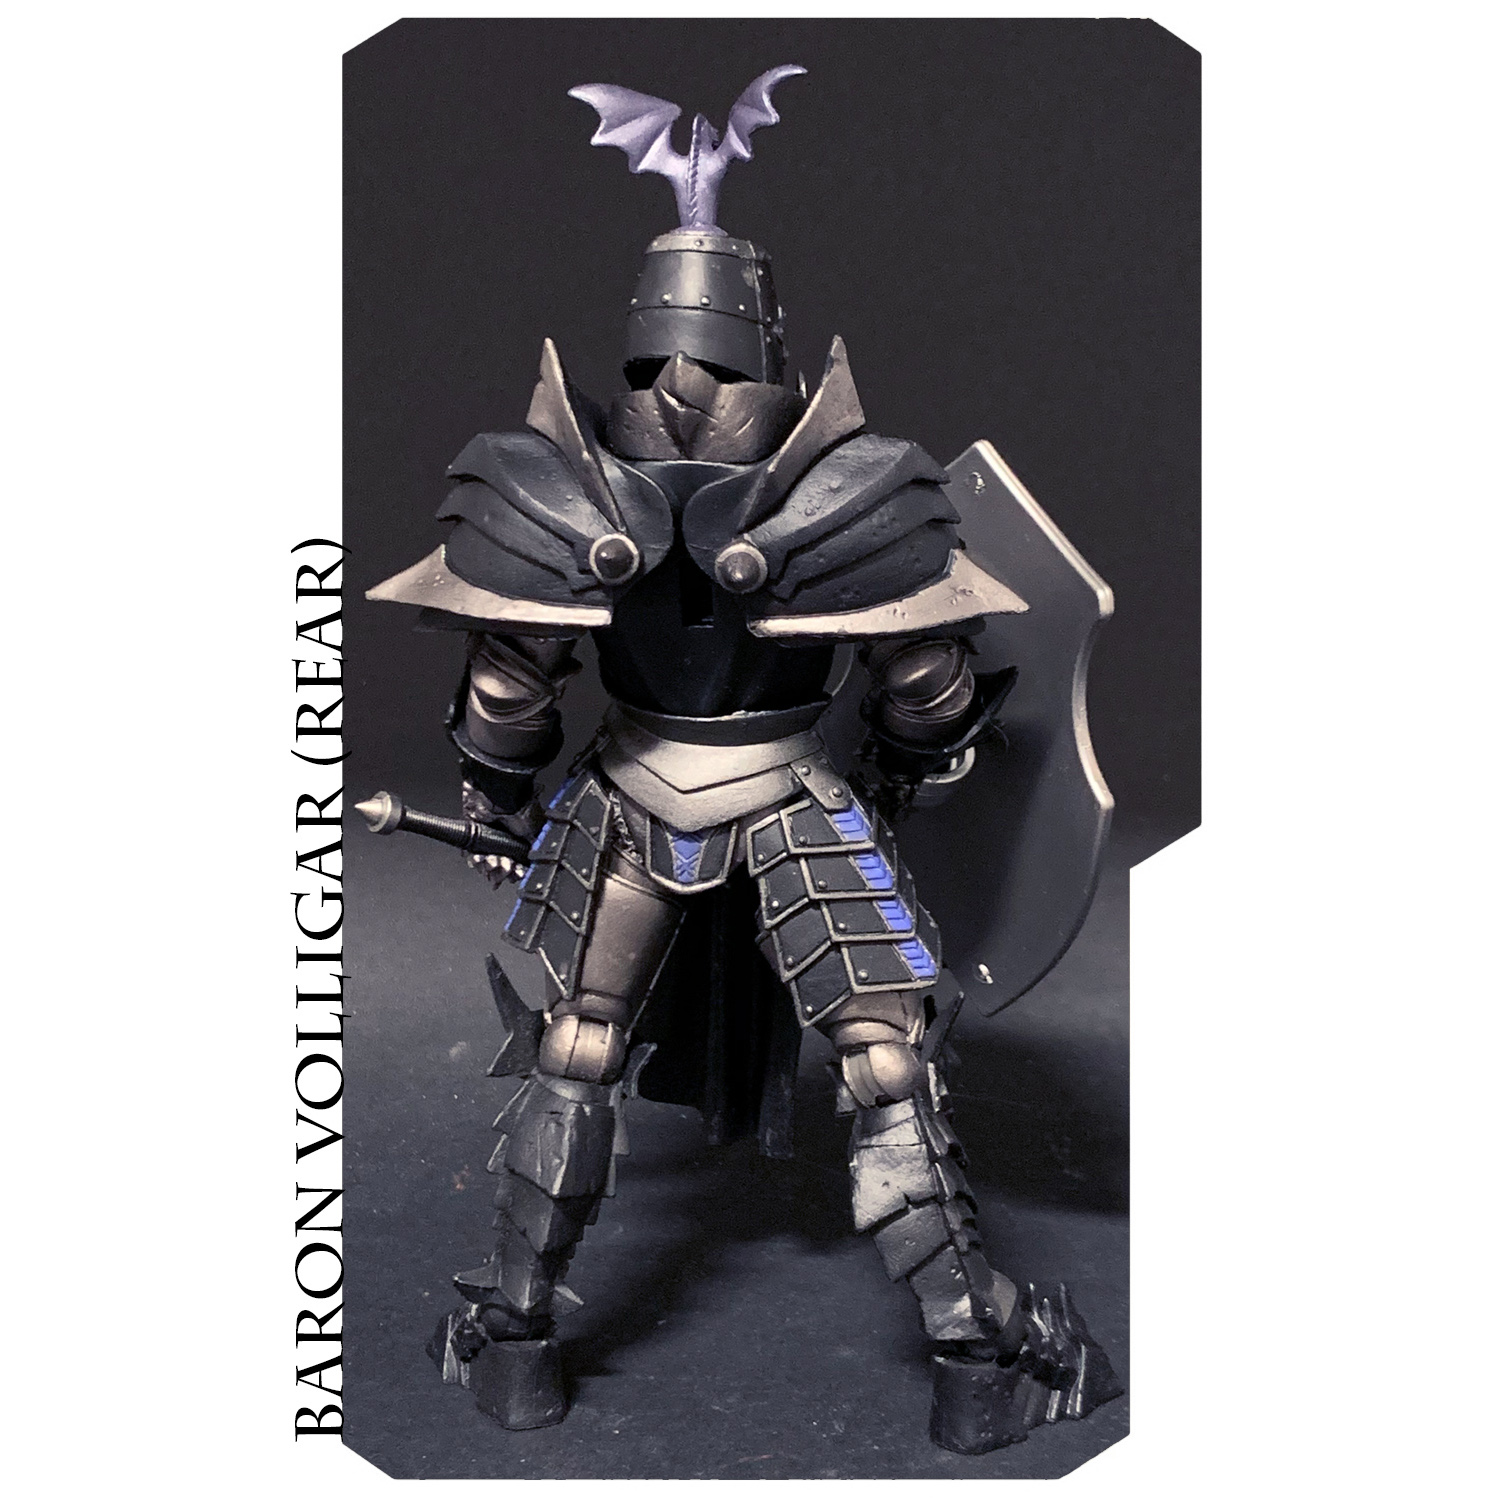 Baron Volligar - Mythic Legions action figure from Four Horsemen 